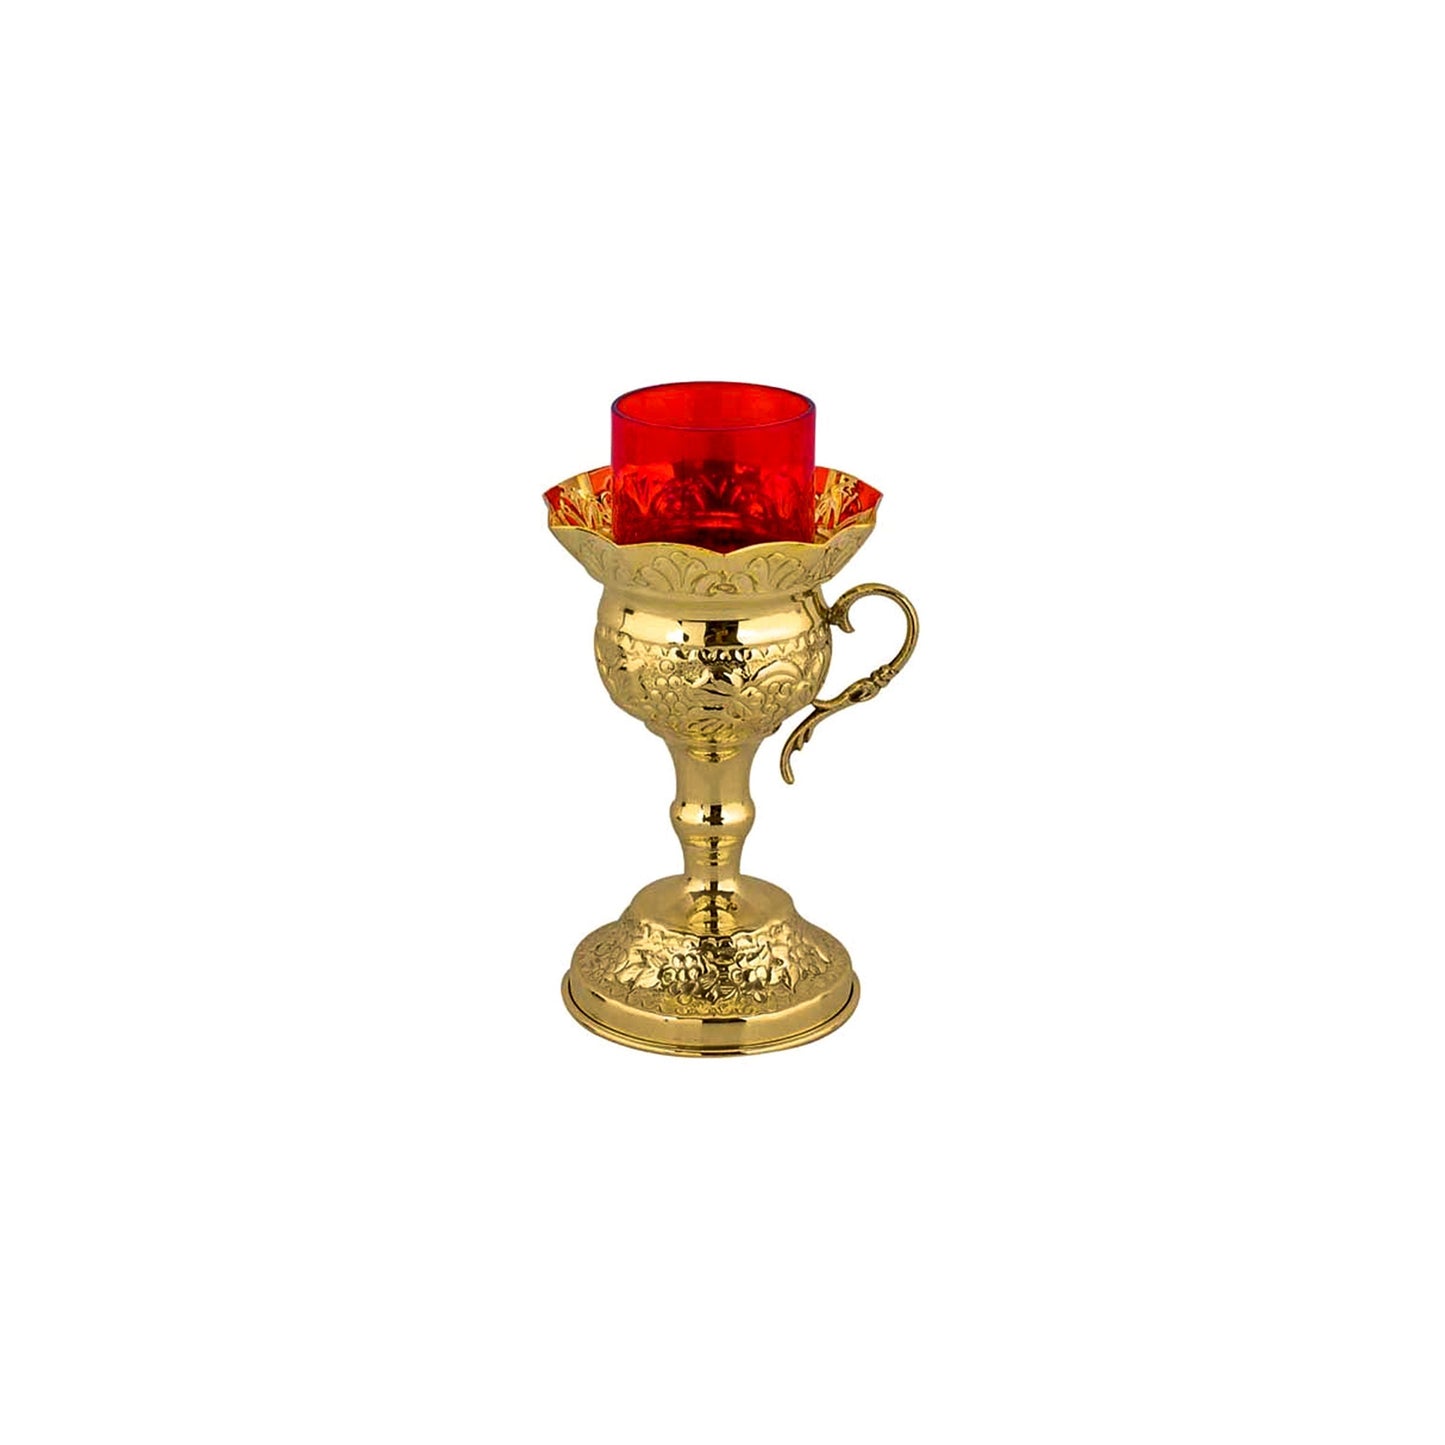 Christian Brass Table Oil Vigil Lamp with Cross, Hand-painted Prayer Standing Oil Lamp, Orthodox Oil Candle w/ glass cup, religious decor TheHolyArt